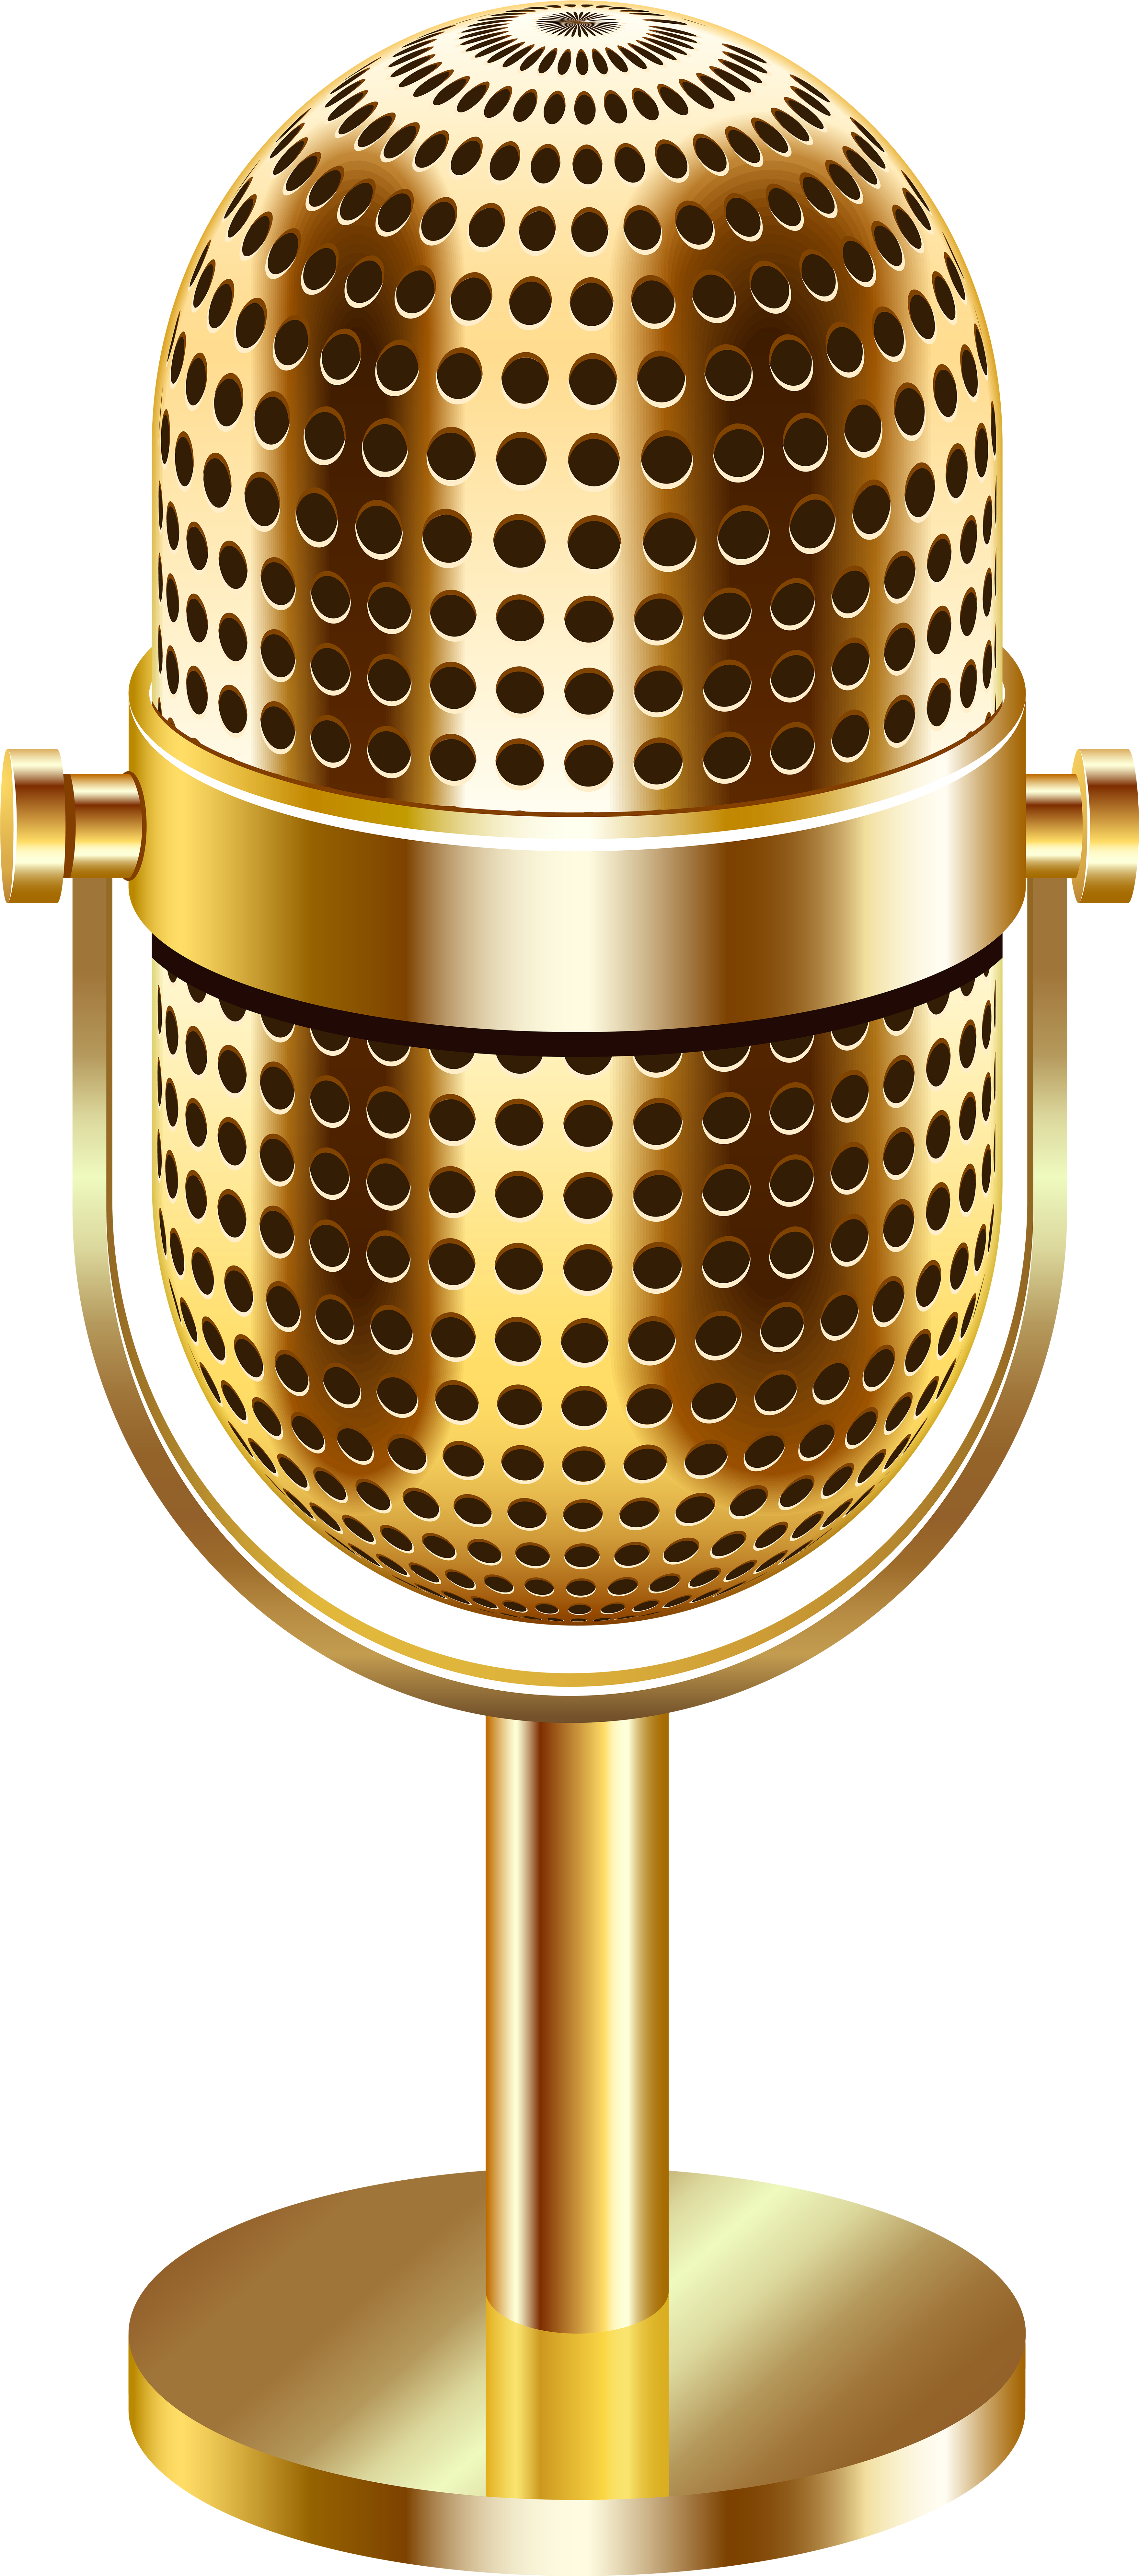 Free Mic Transparent Background Download Free Mic Transparent Background Png Images Free Cliparts On Clipart Library